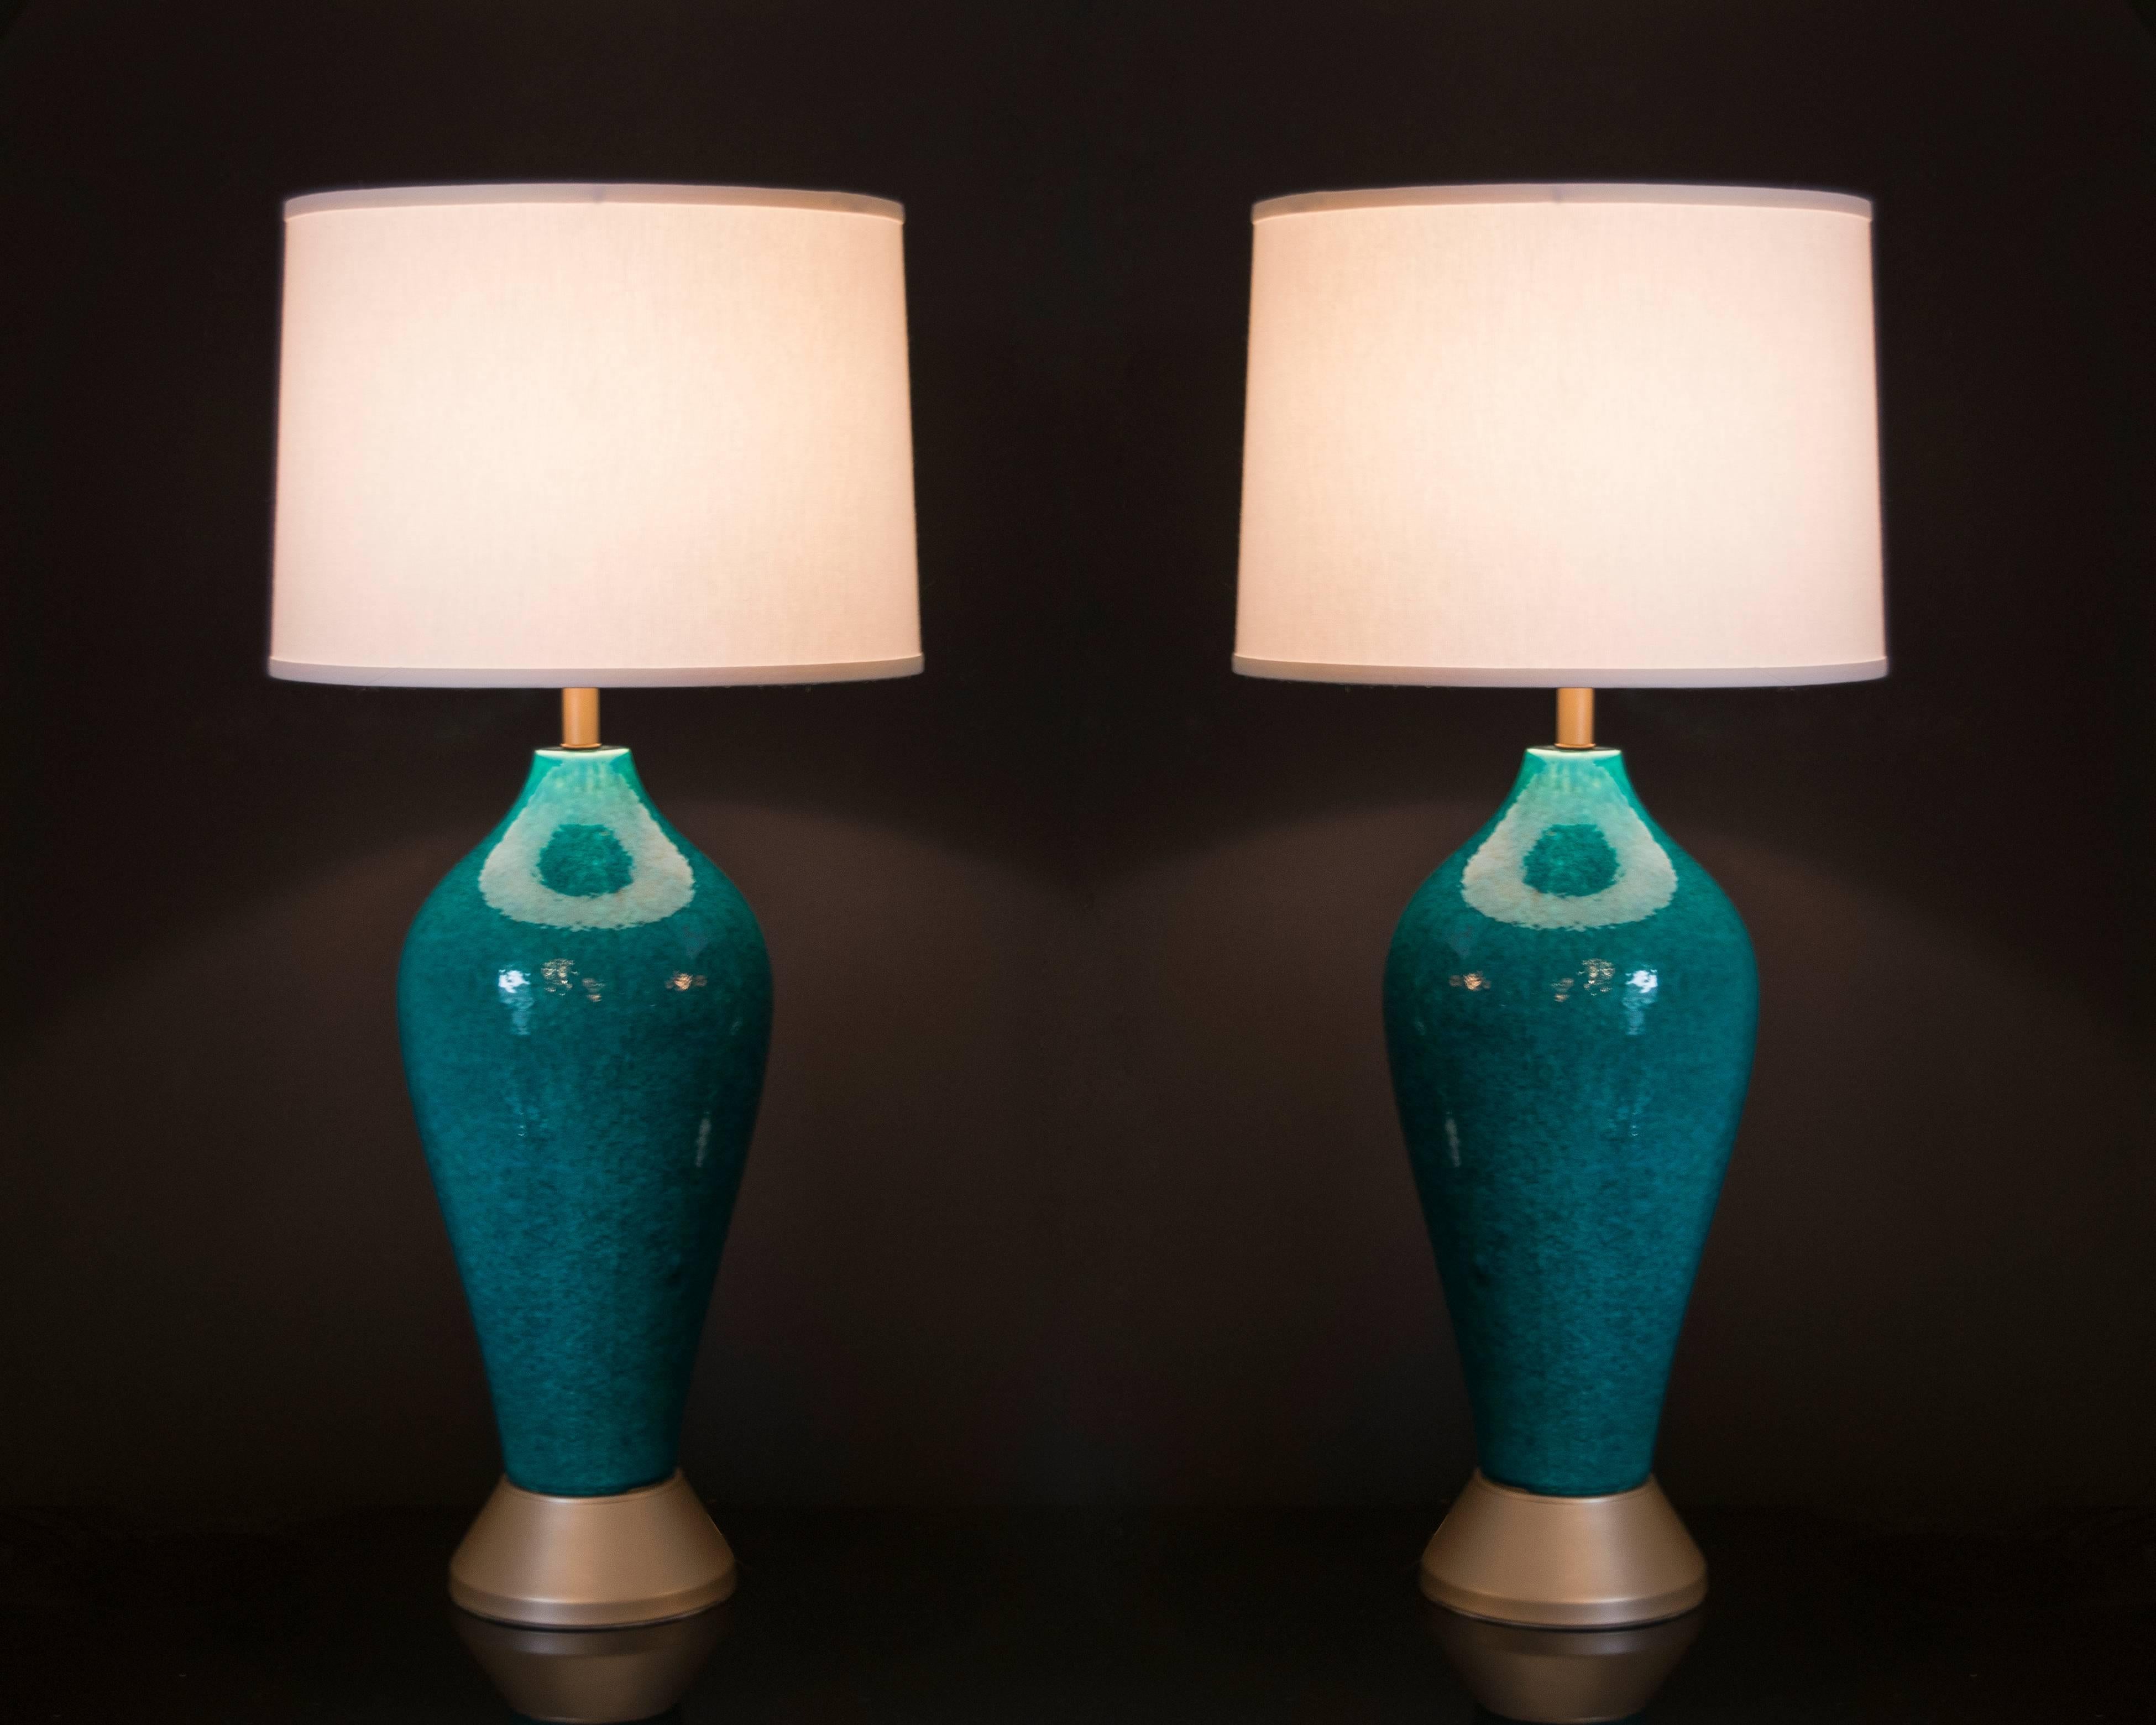 This pair of lamps has the most beautiful color of turquoise with a mottled glaze finish. The lamps are in excellent condition with the exception at the top of the lamps there are some glazing drips. These are not noticeable nor do they detract from